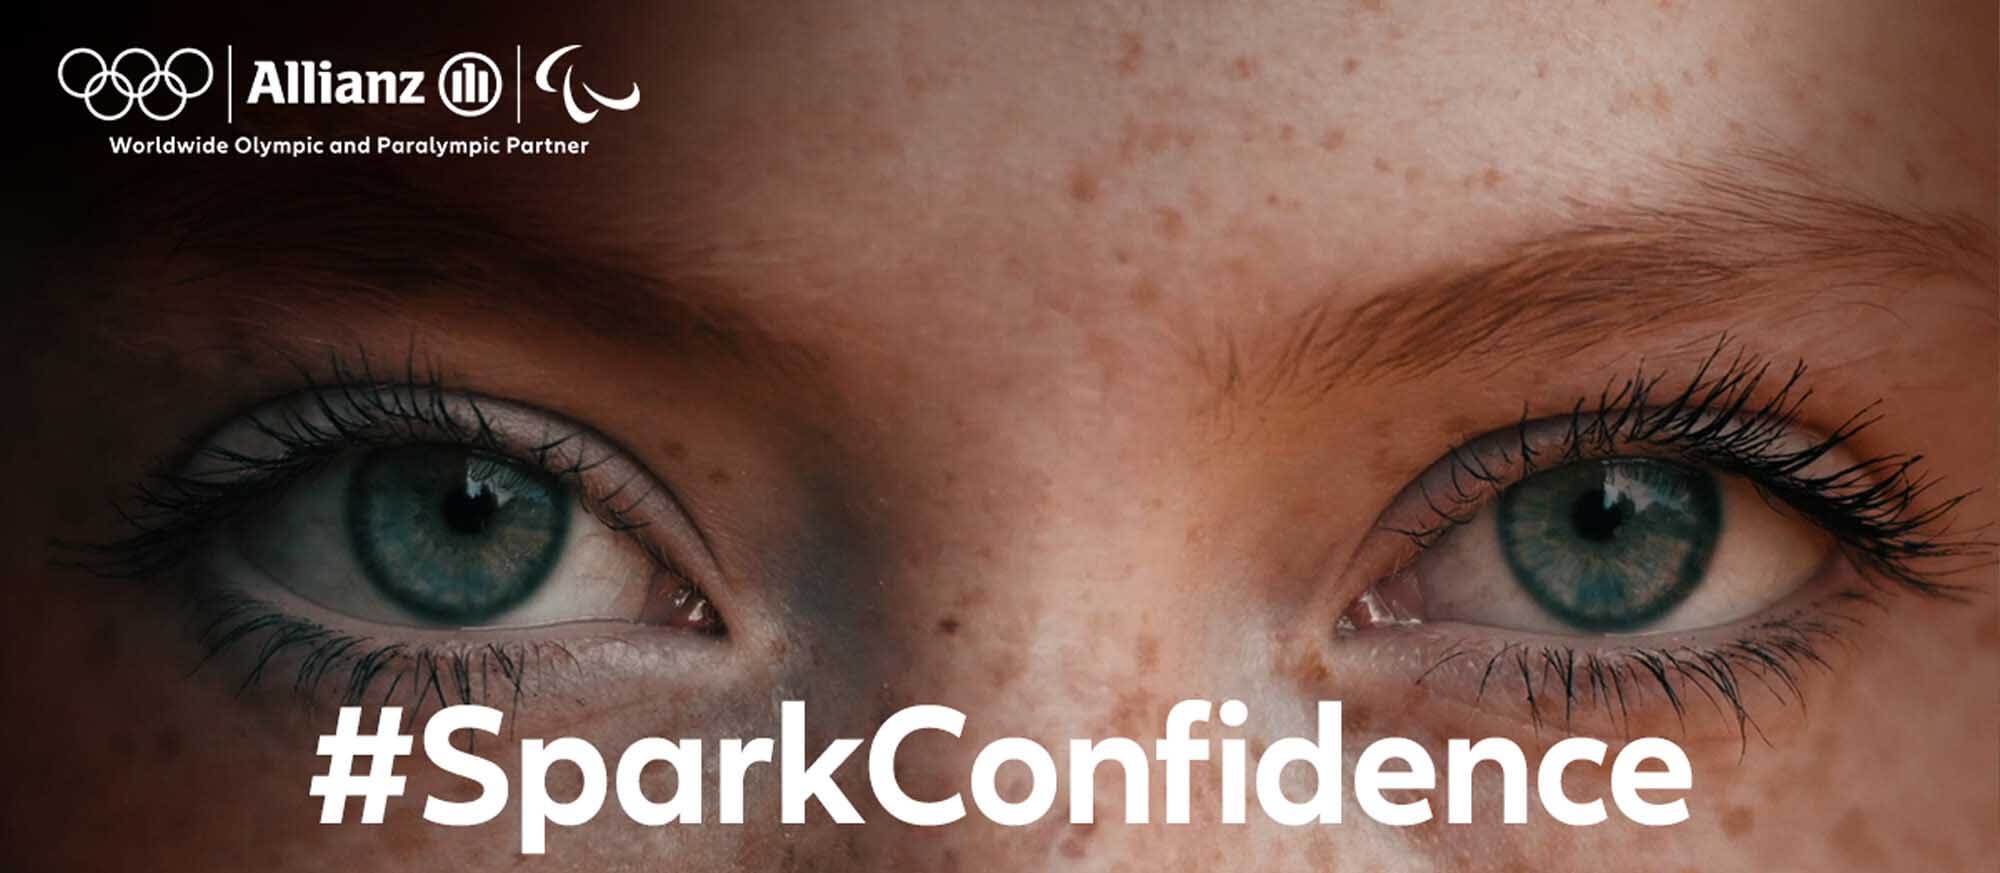 close up of eyes staring at the camera, with the #SparkConfidence tag